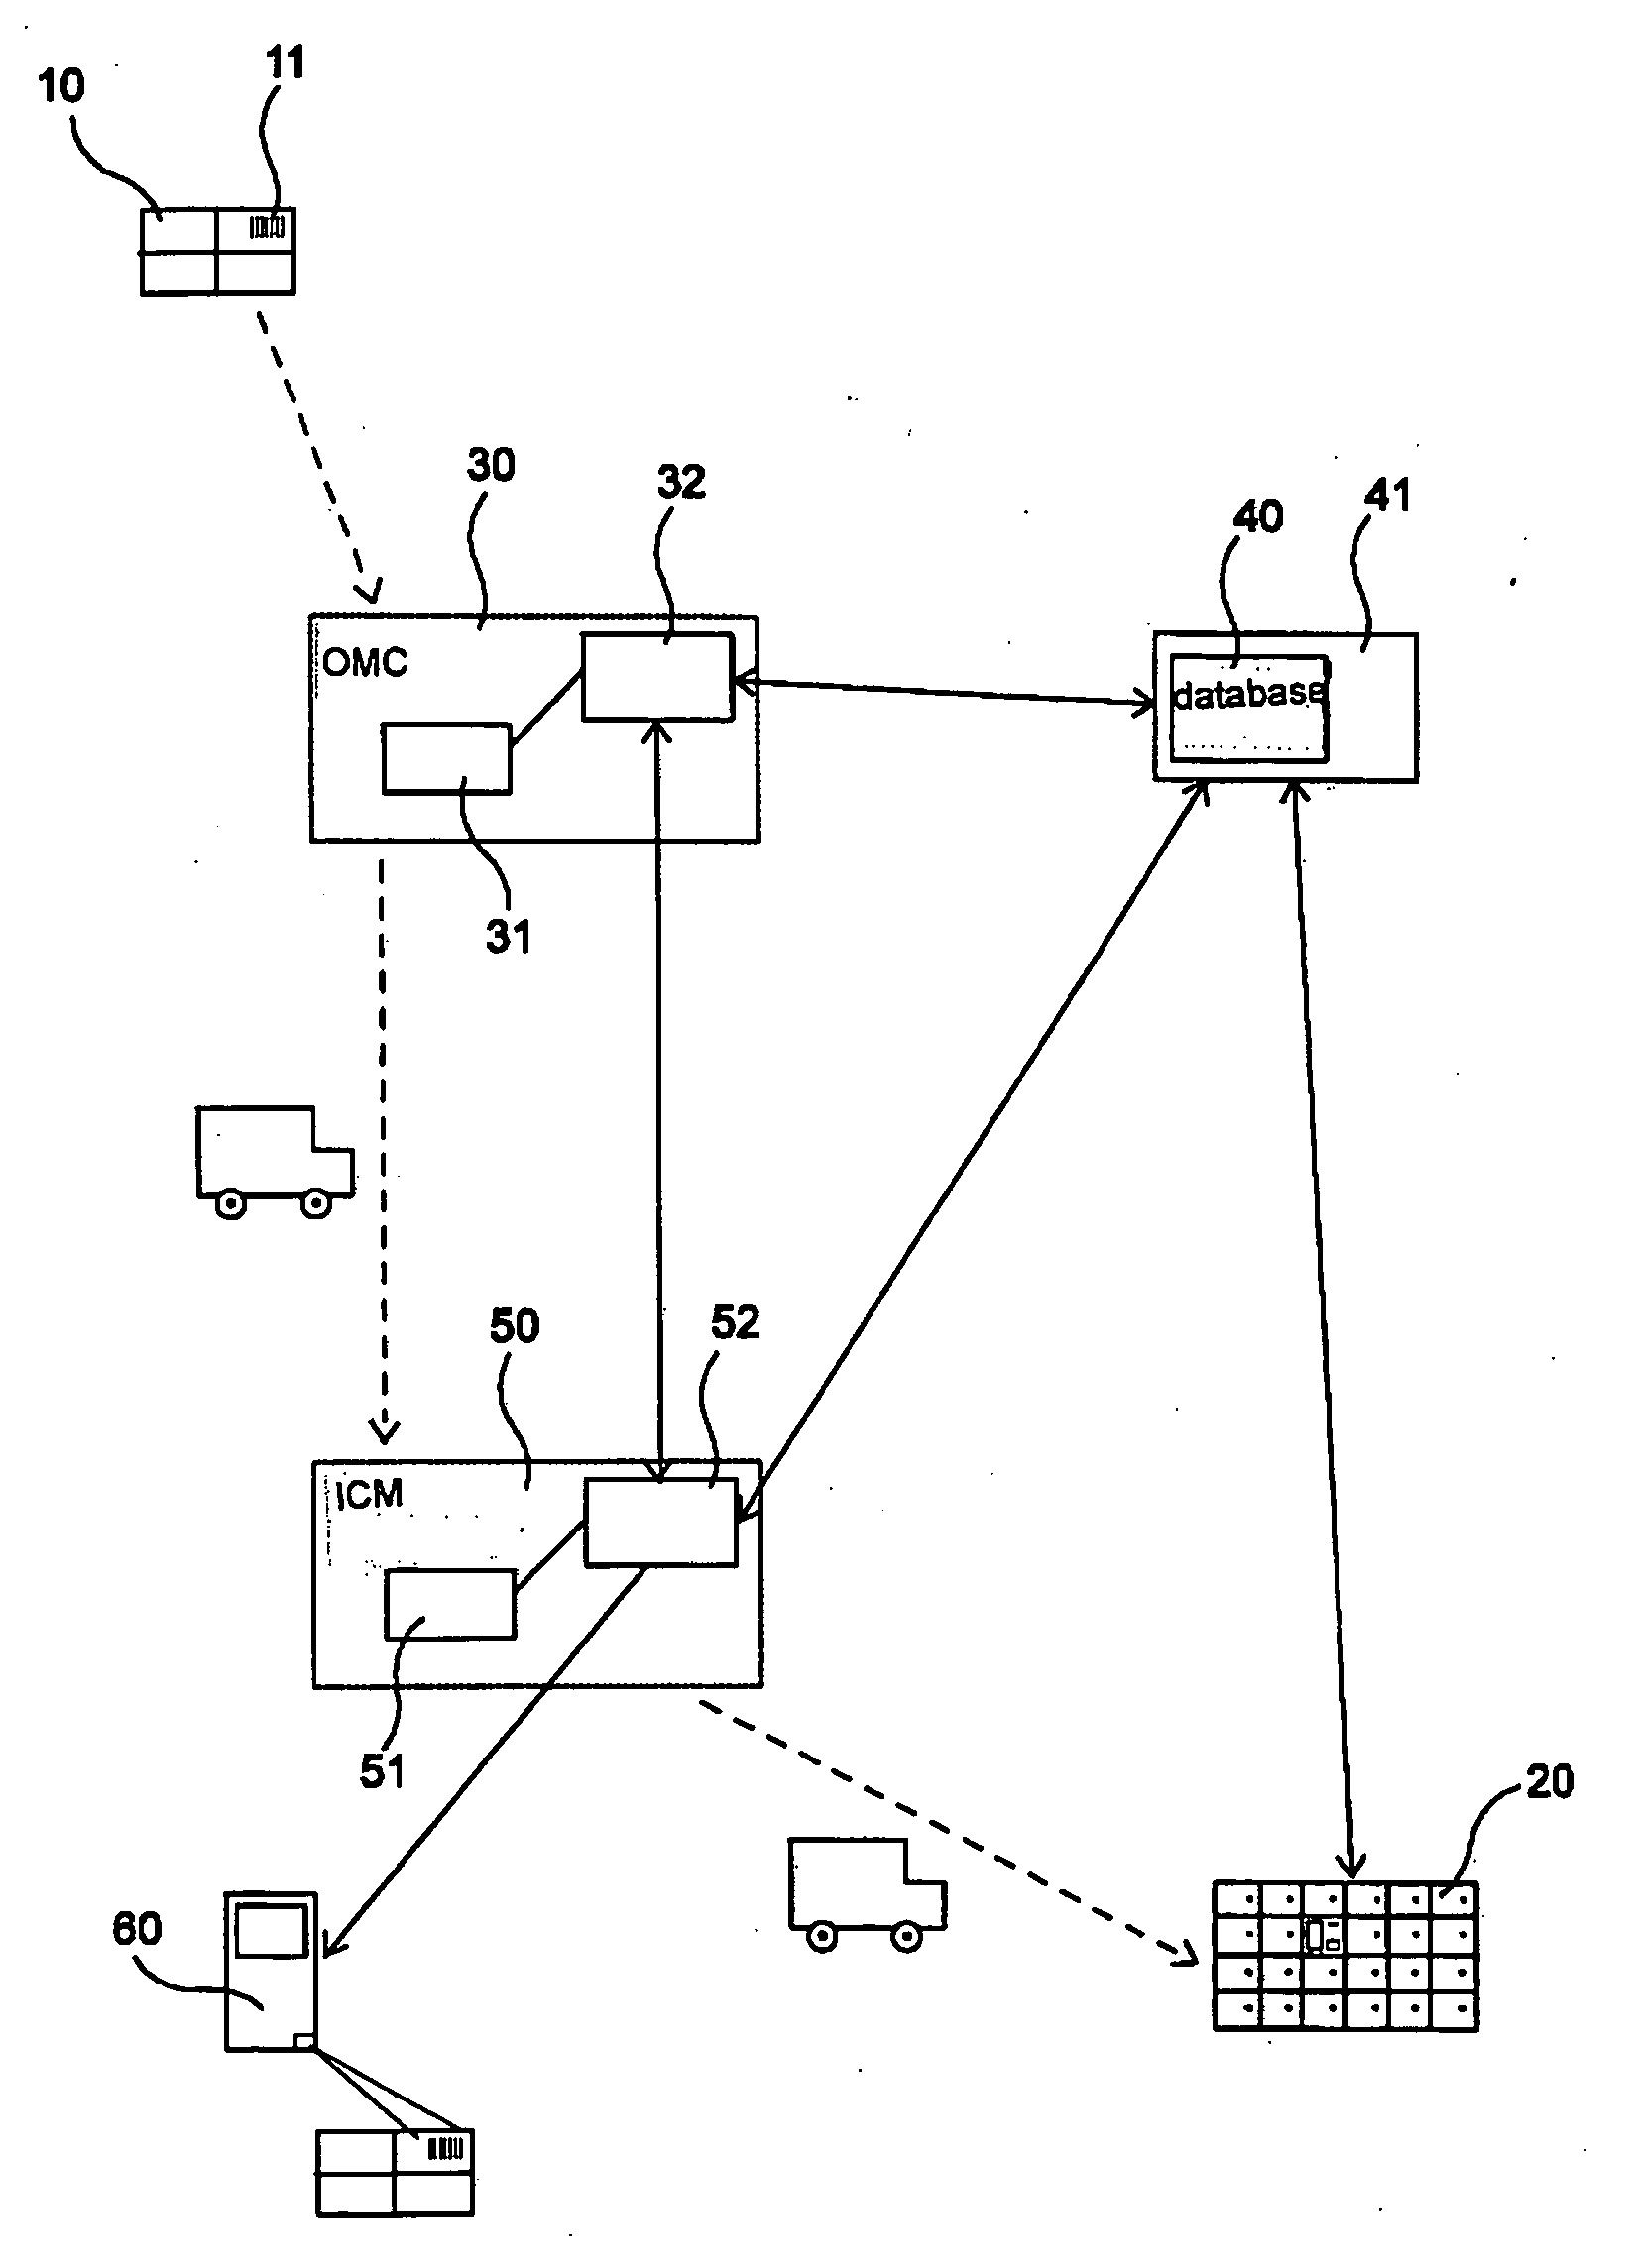 Method and arrangement of devices for processing mail items addressed to post office box systems within a postal transportation and mail distriburion system